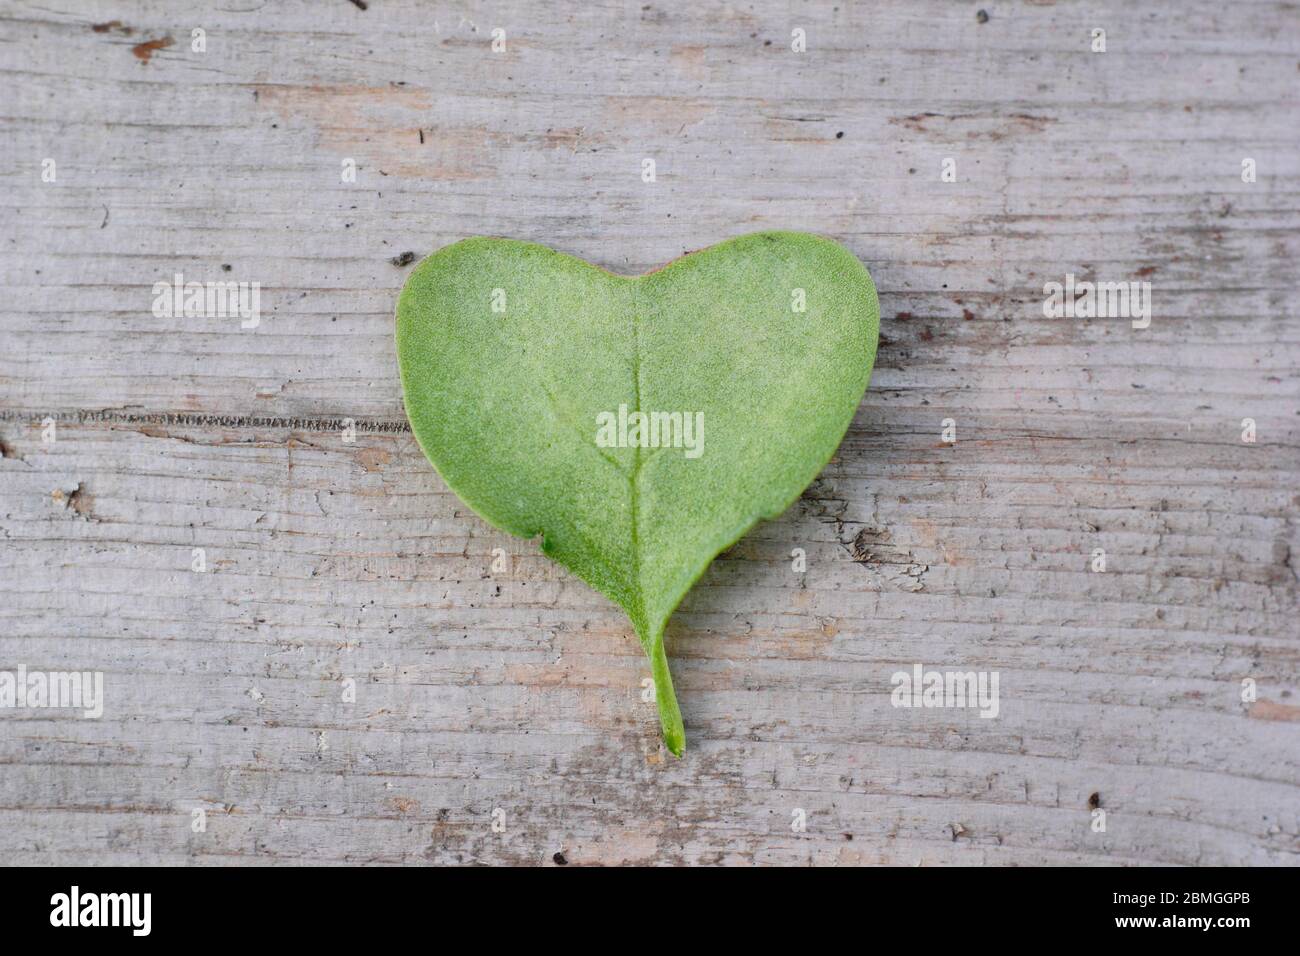 Heart shaped leaf of a young radish plant Stock Photo